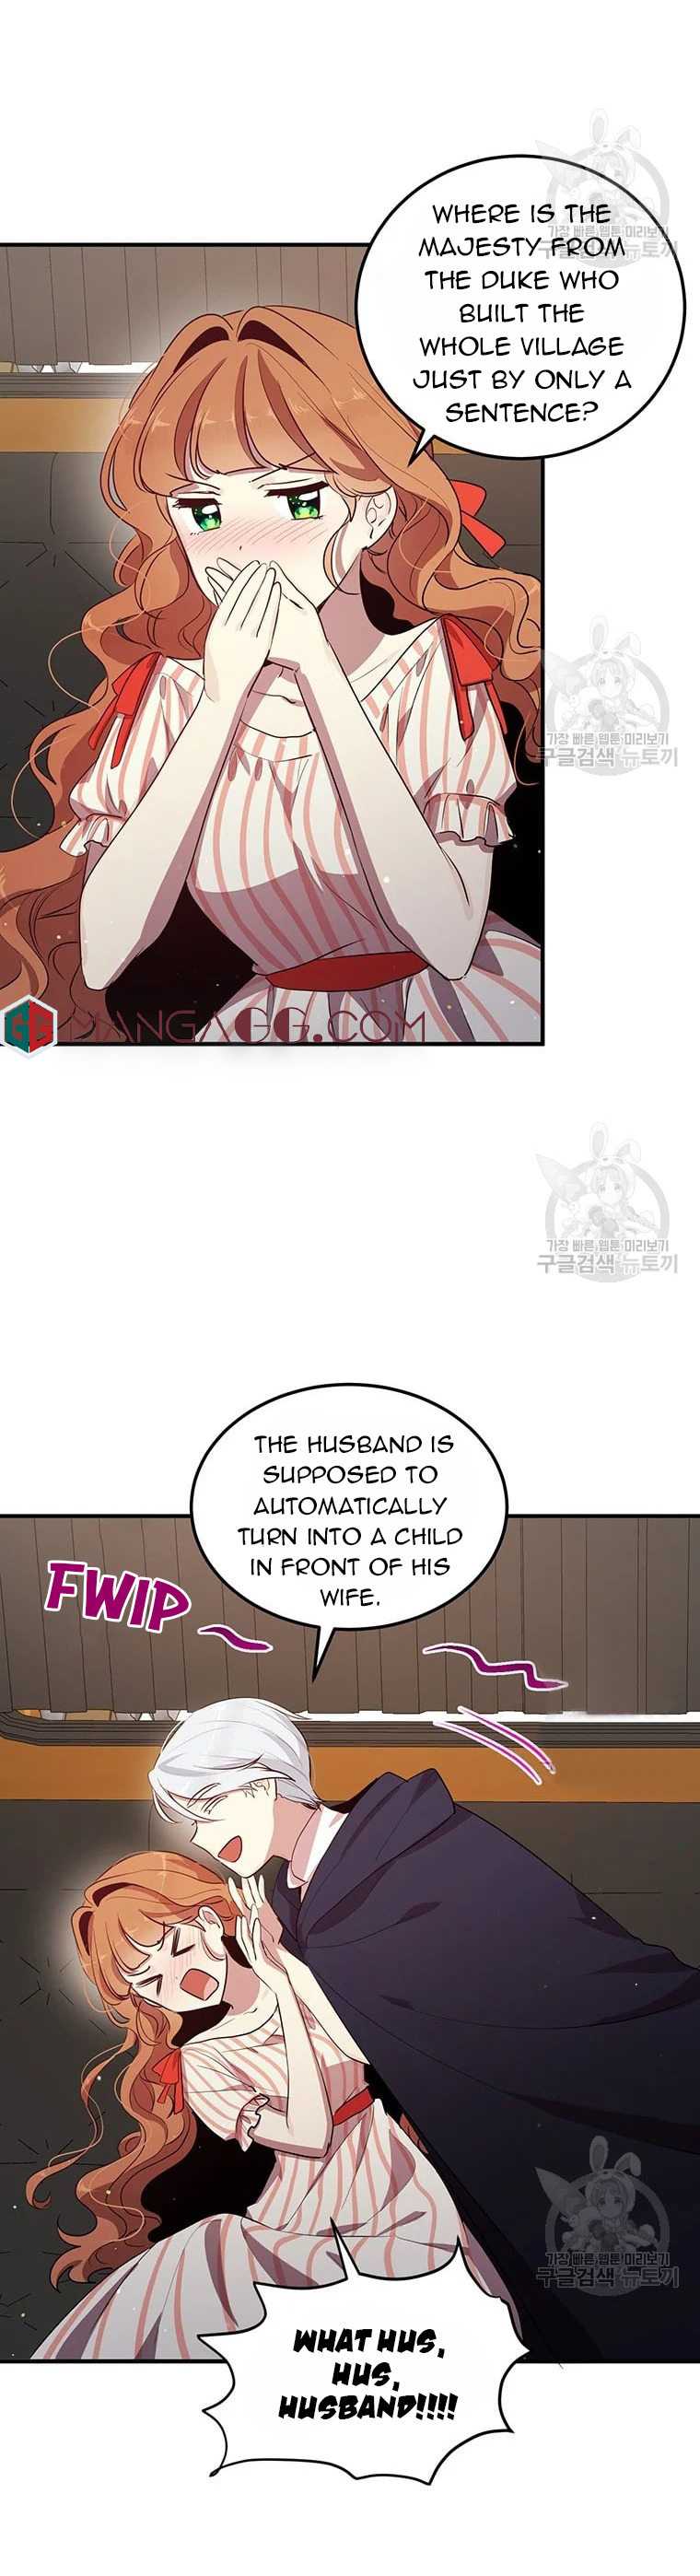 Why Are You Doing This, Duke? Chapter 119 - Page 9